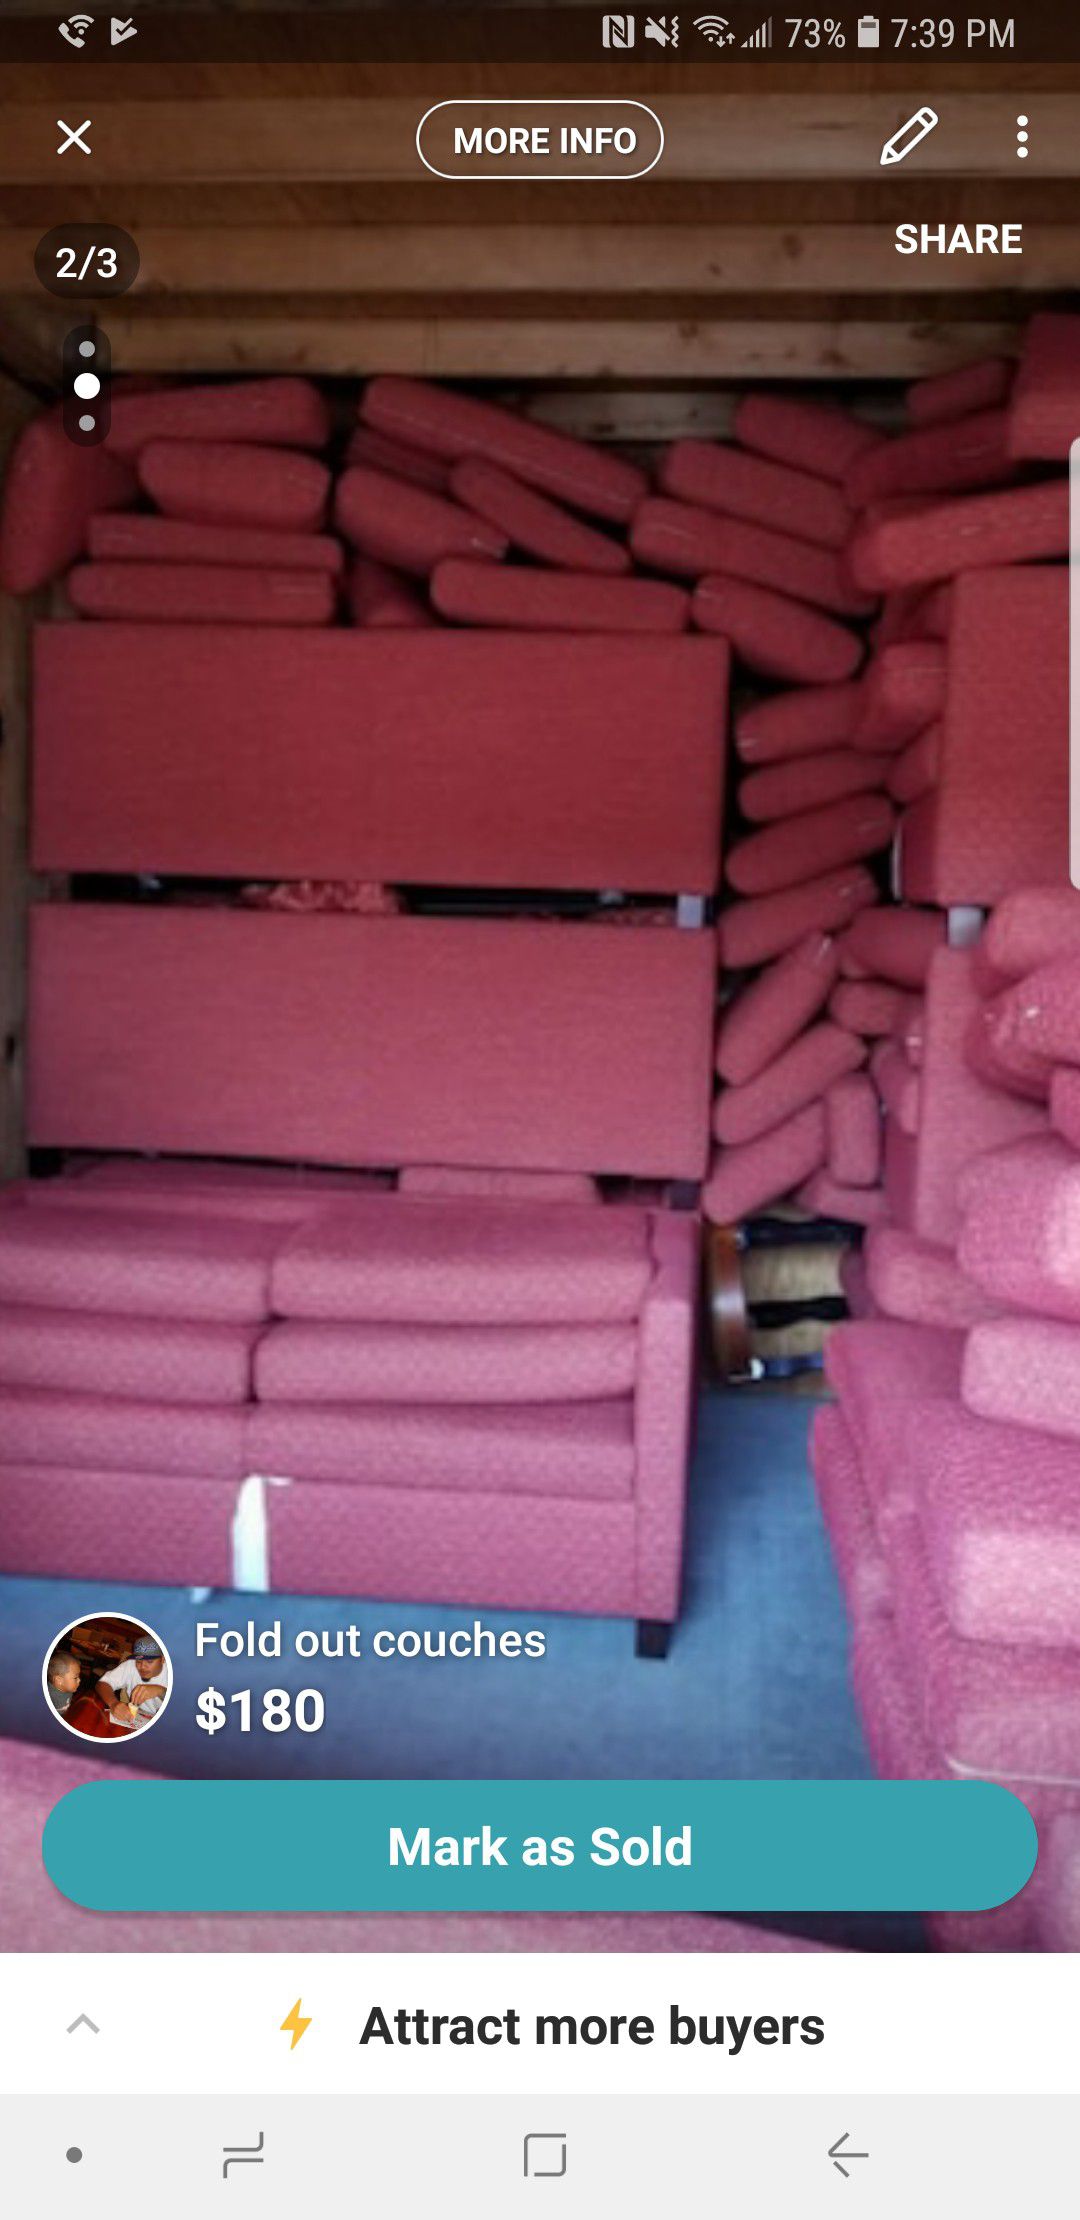 Fold out couches